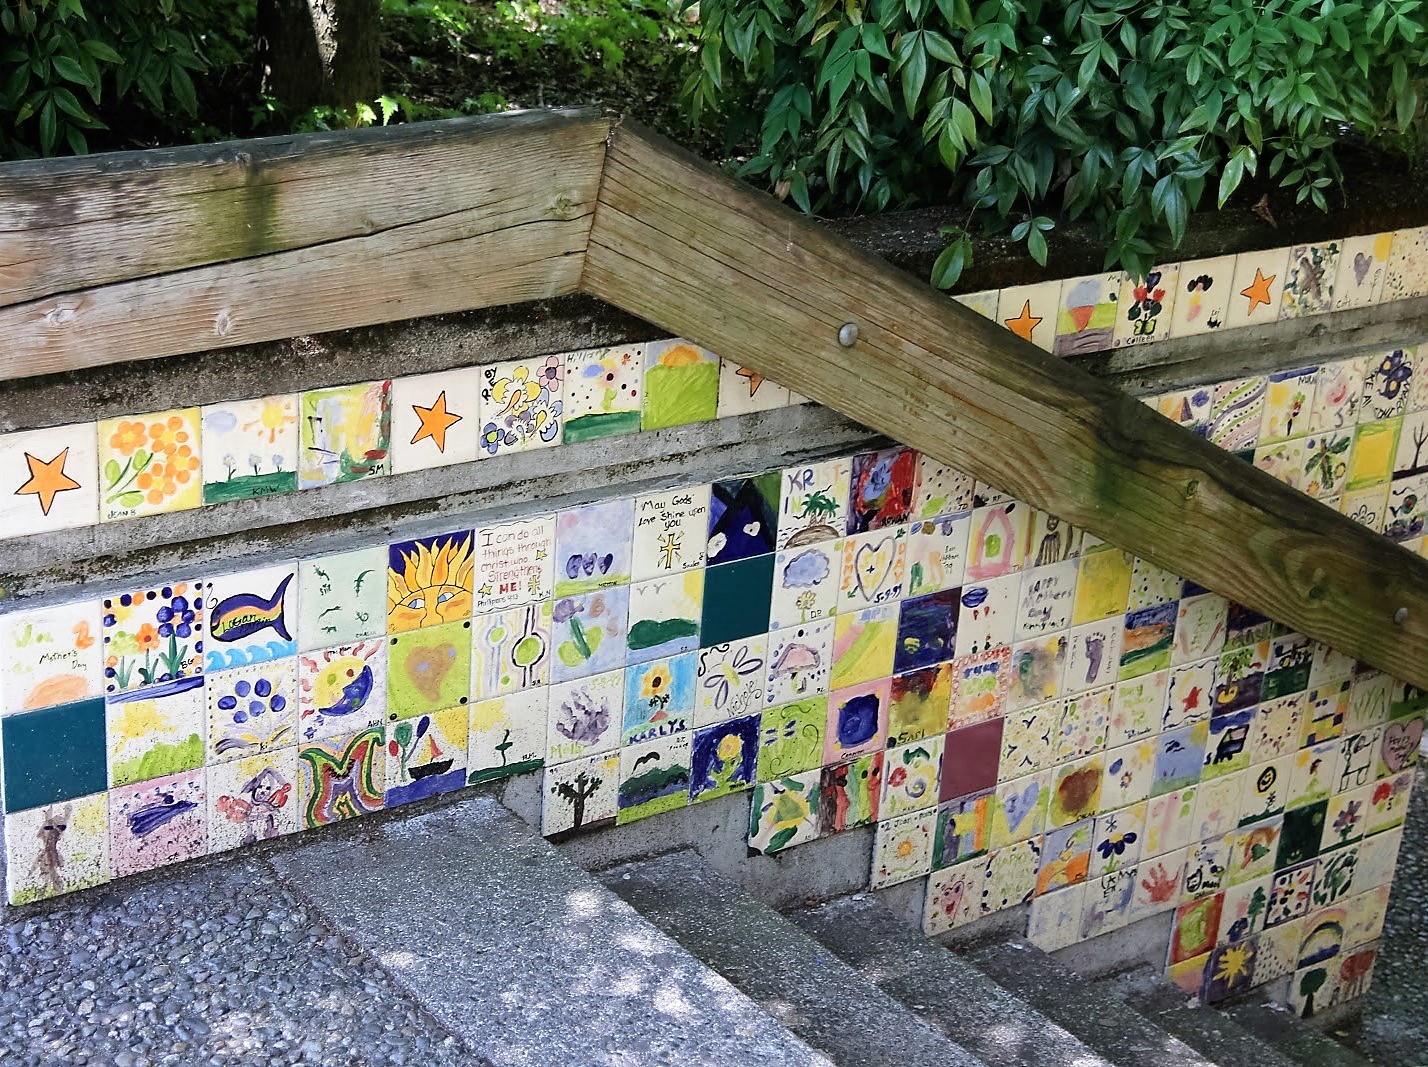 Tiles painted by local children in downtown Kirkland